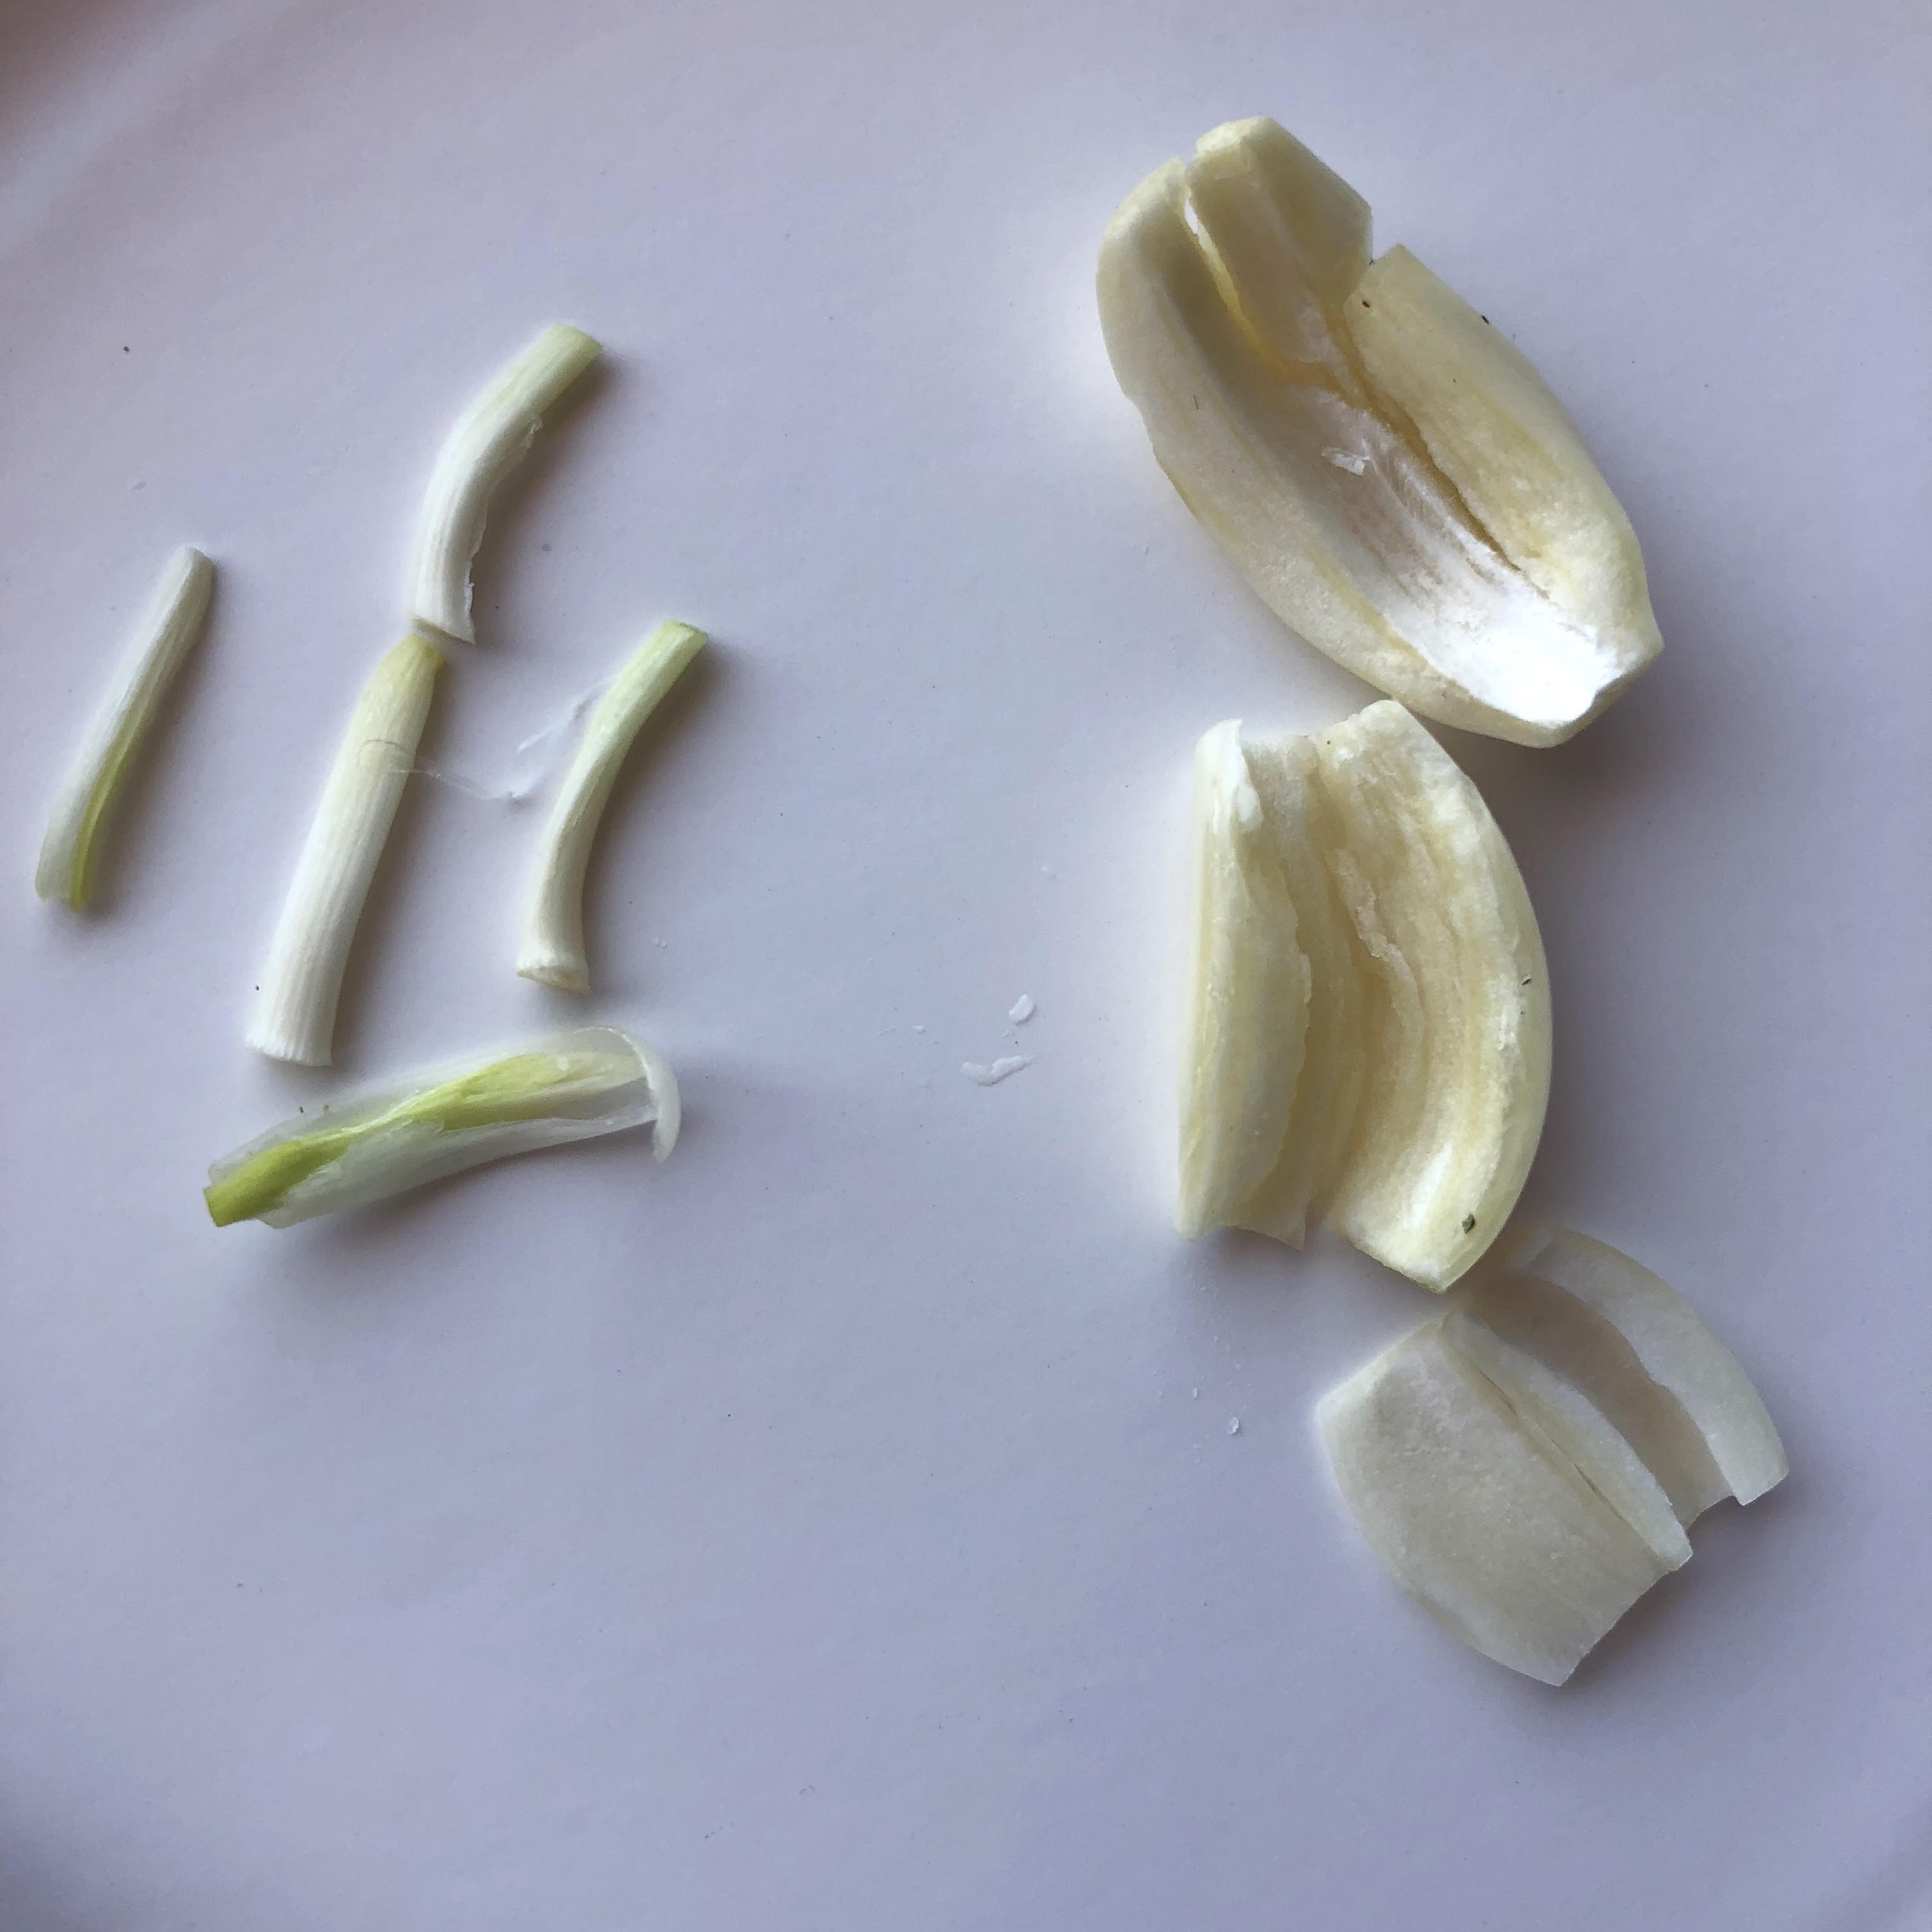 removing the germ from garlic before cooking chef jeremy fox jacques pepin and david lebovitz